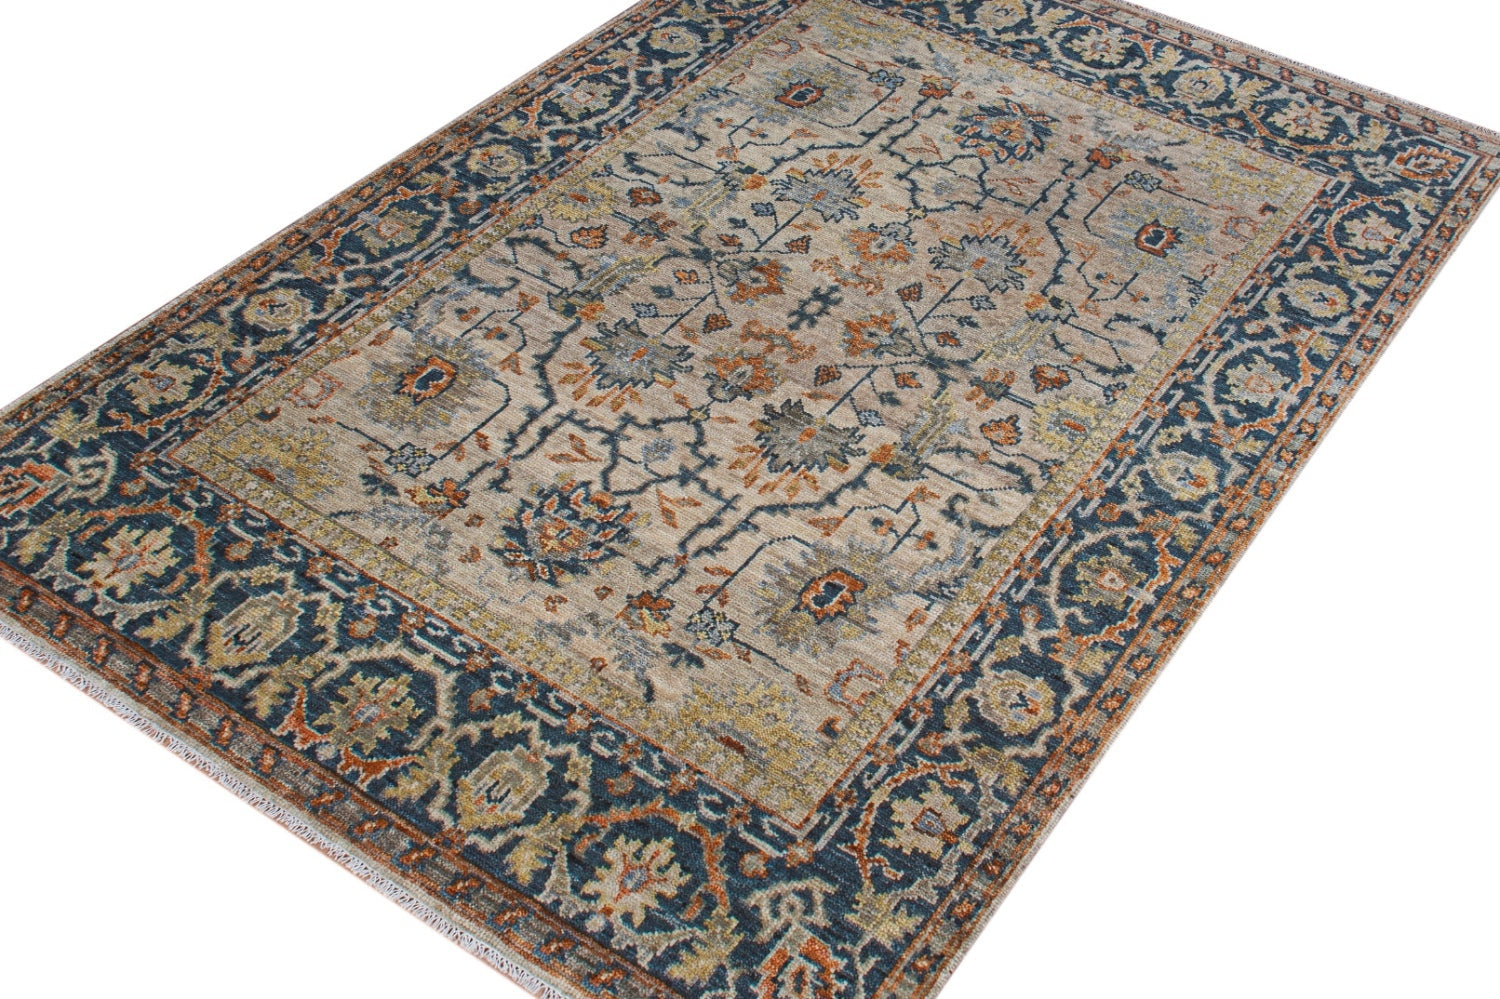 Sultanabad 6 Handwoven Traditional Rug, J71676